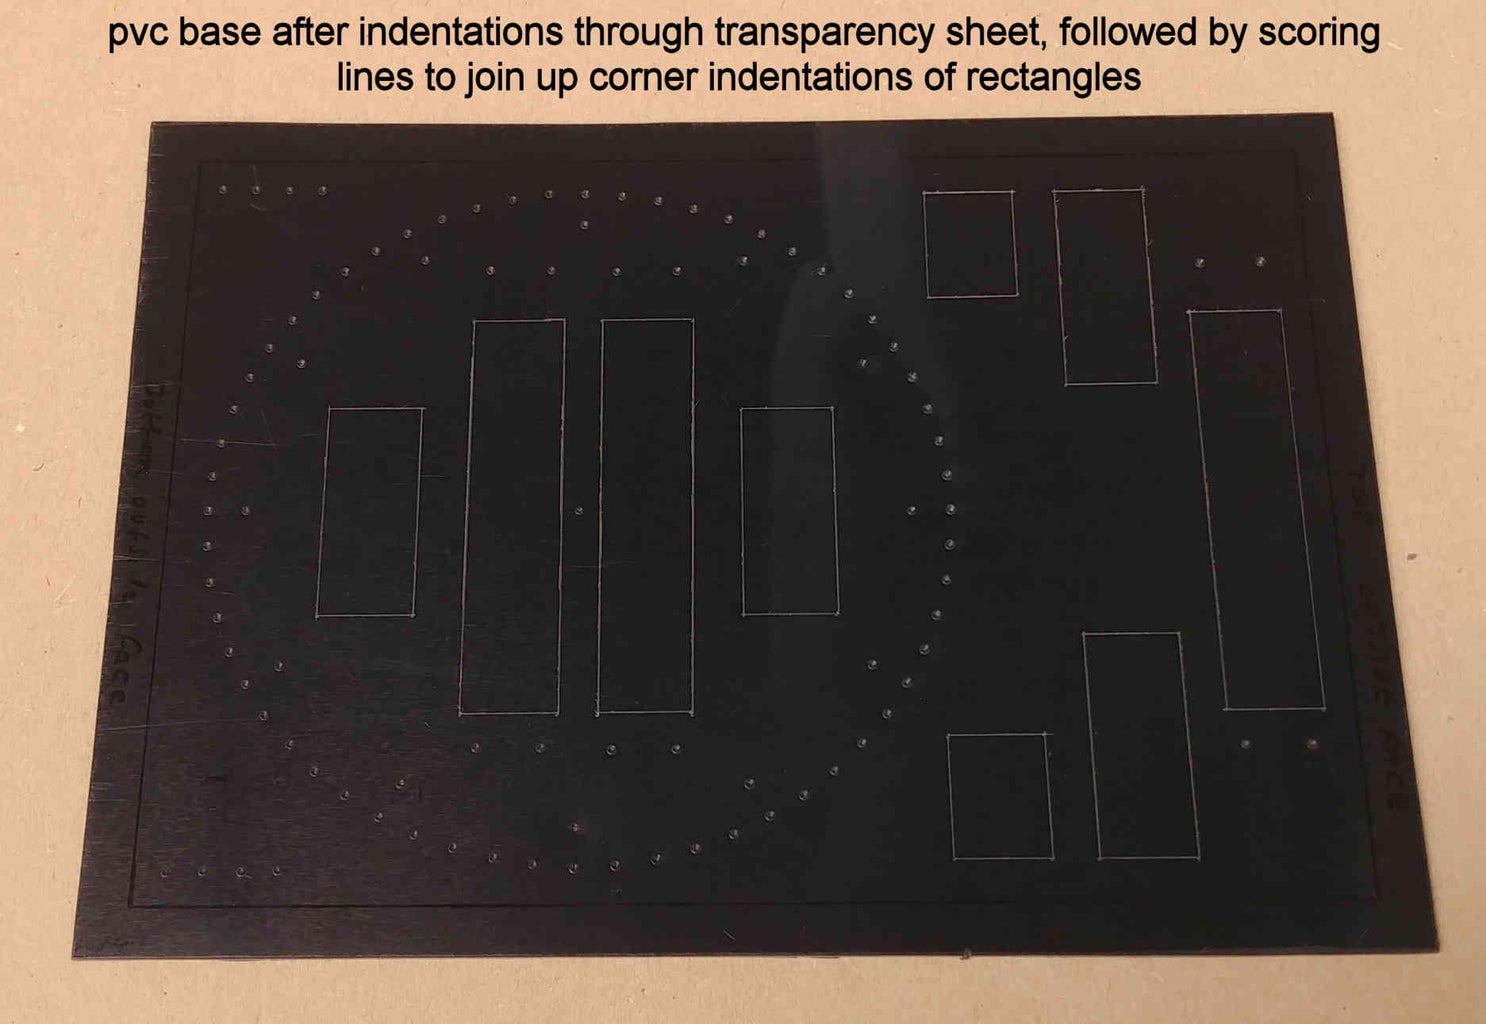 Printing and Using the Transparency Sheet Construction Aid